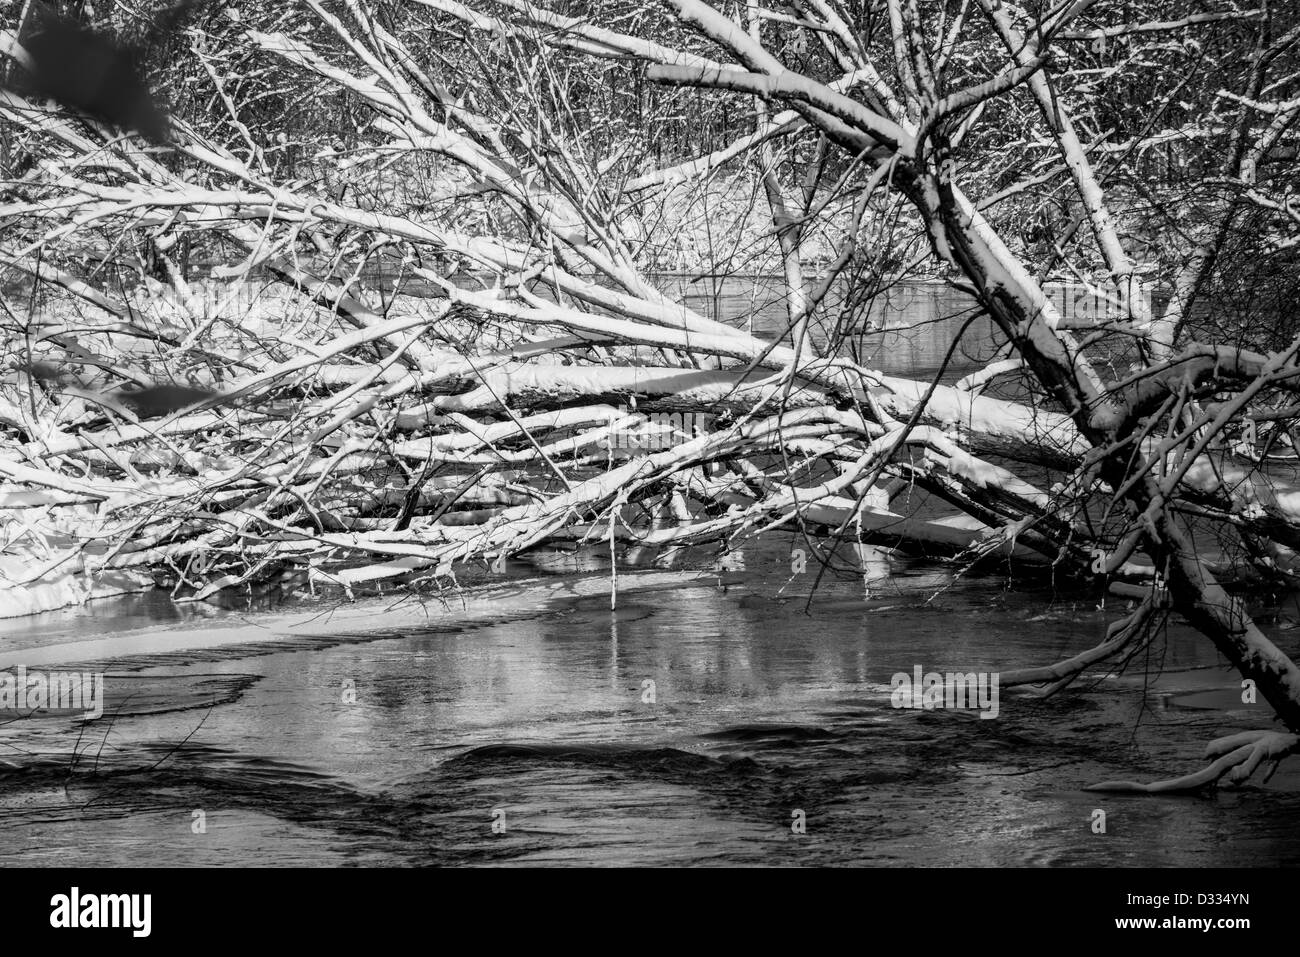 Grayscale photograph of a snow covered tree that has fallen into a large creek shot in winter. Stock Photo